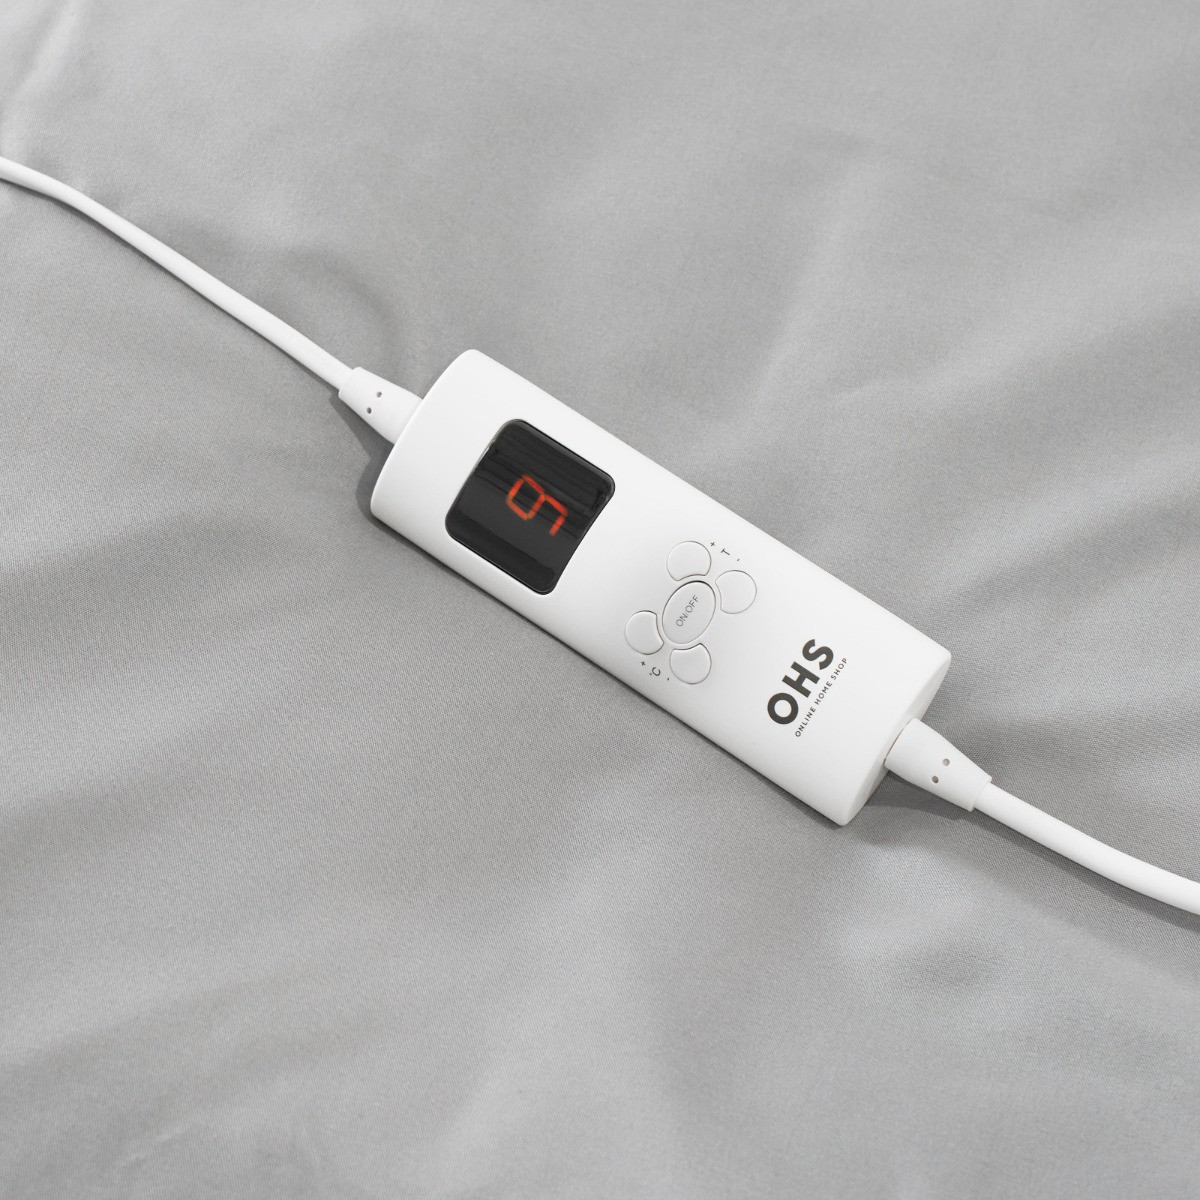 OHS Heated Over Electric Blanket - Charcoal>